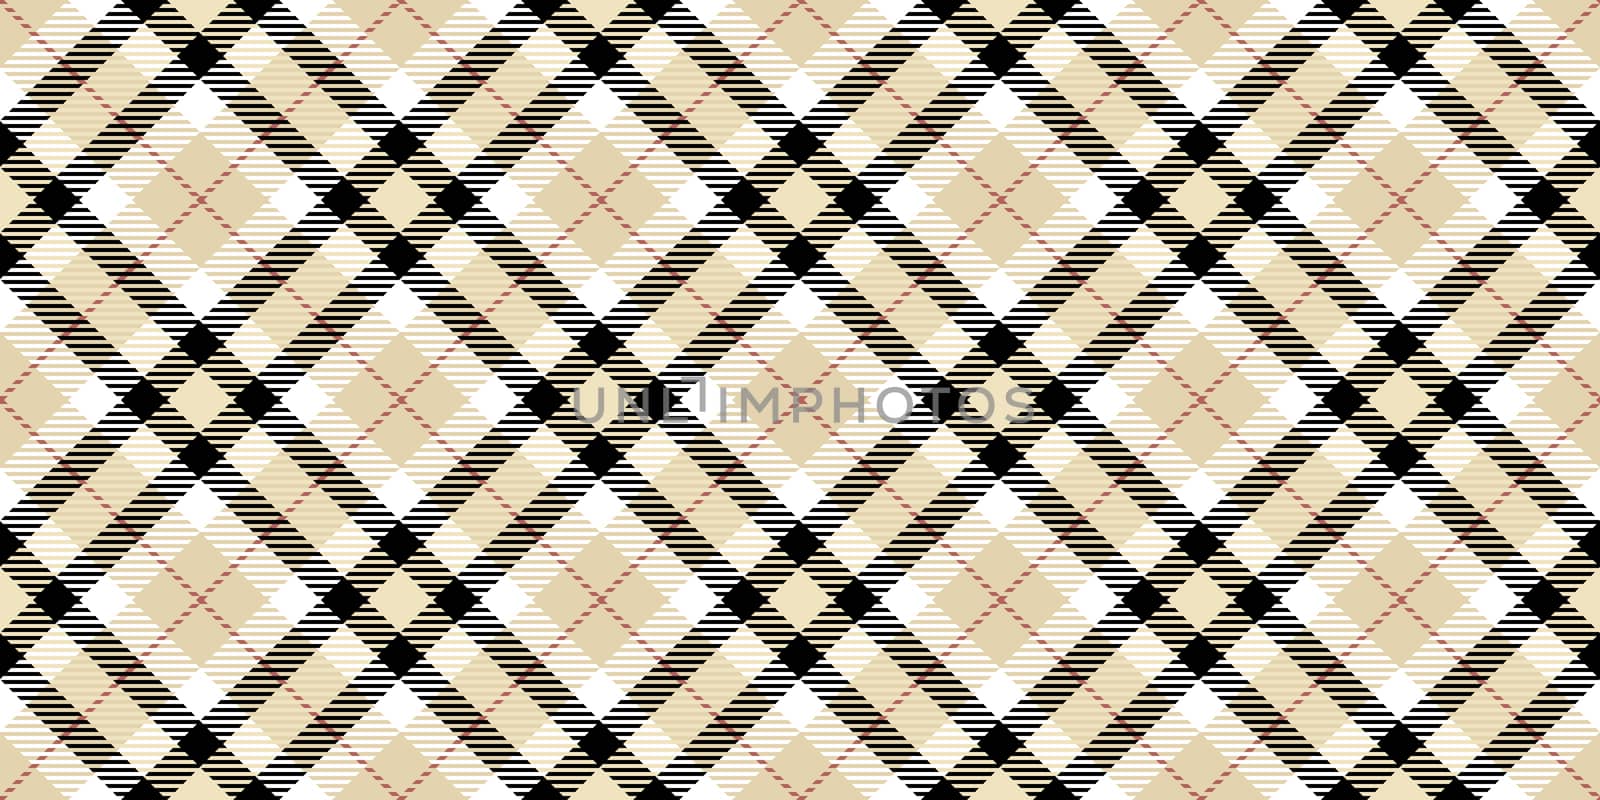 Elegant Seamless Checkered Rhombuses Pattern. Plaid Rug Background. Tartan Texture. by sanches812